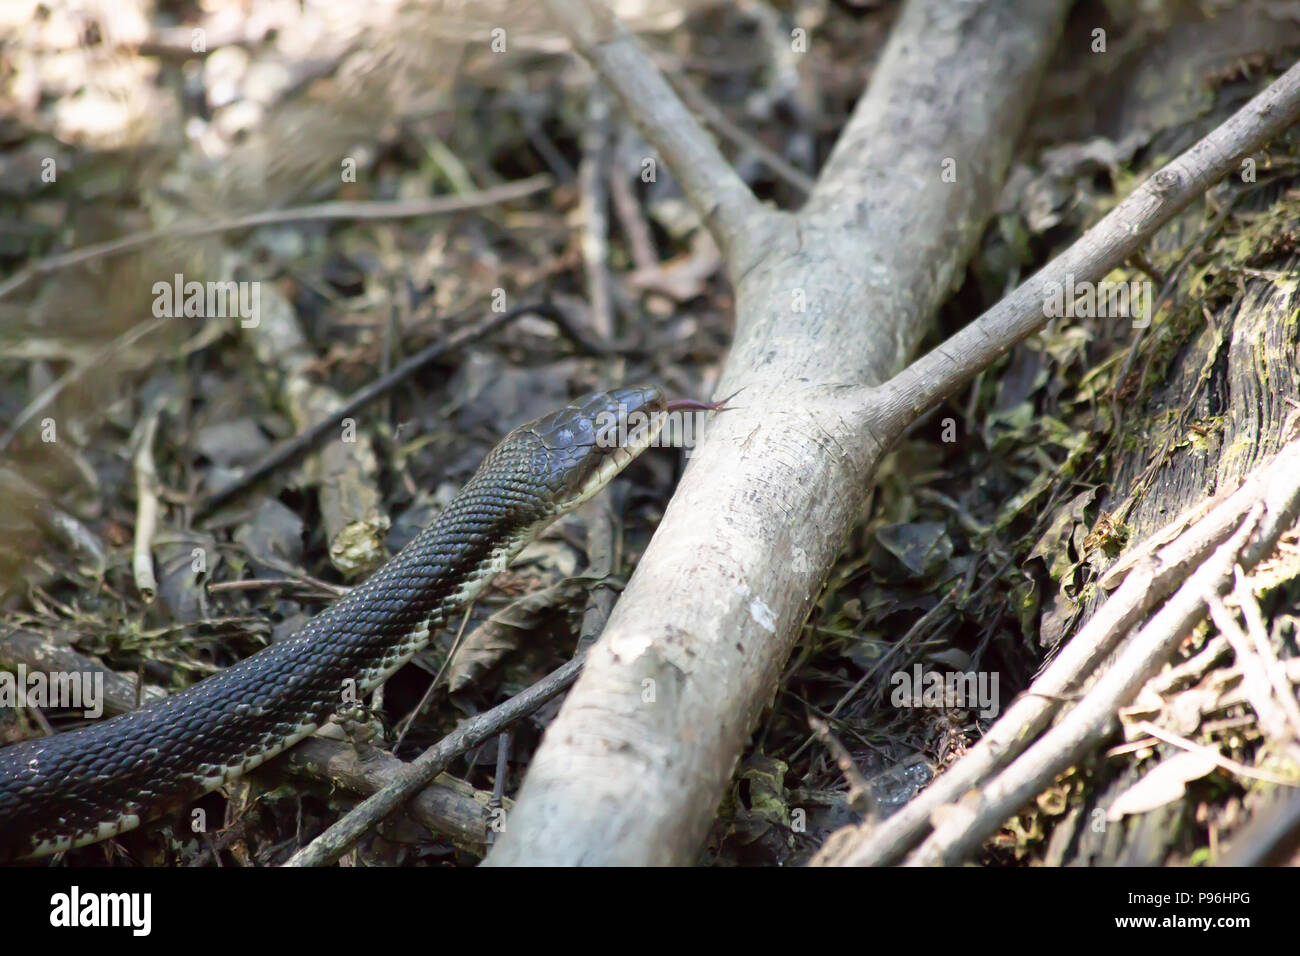 Western rat snake (Pantherophis obsoletus), also known as a chicken snake, slithering over a fallen tree branch Stock Photo